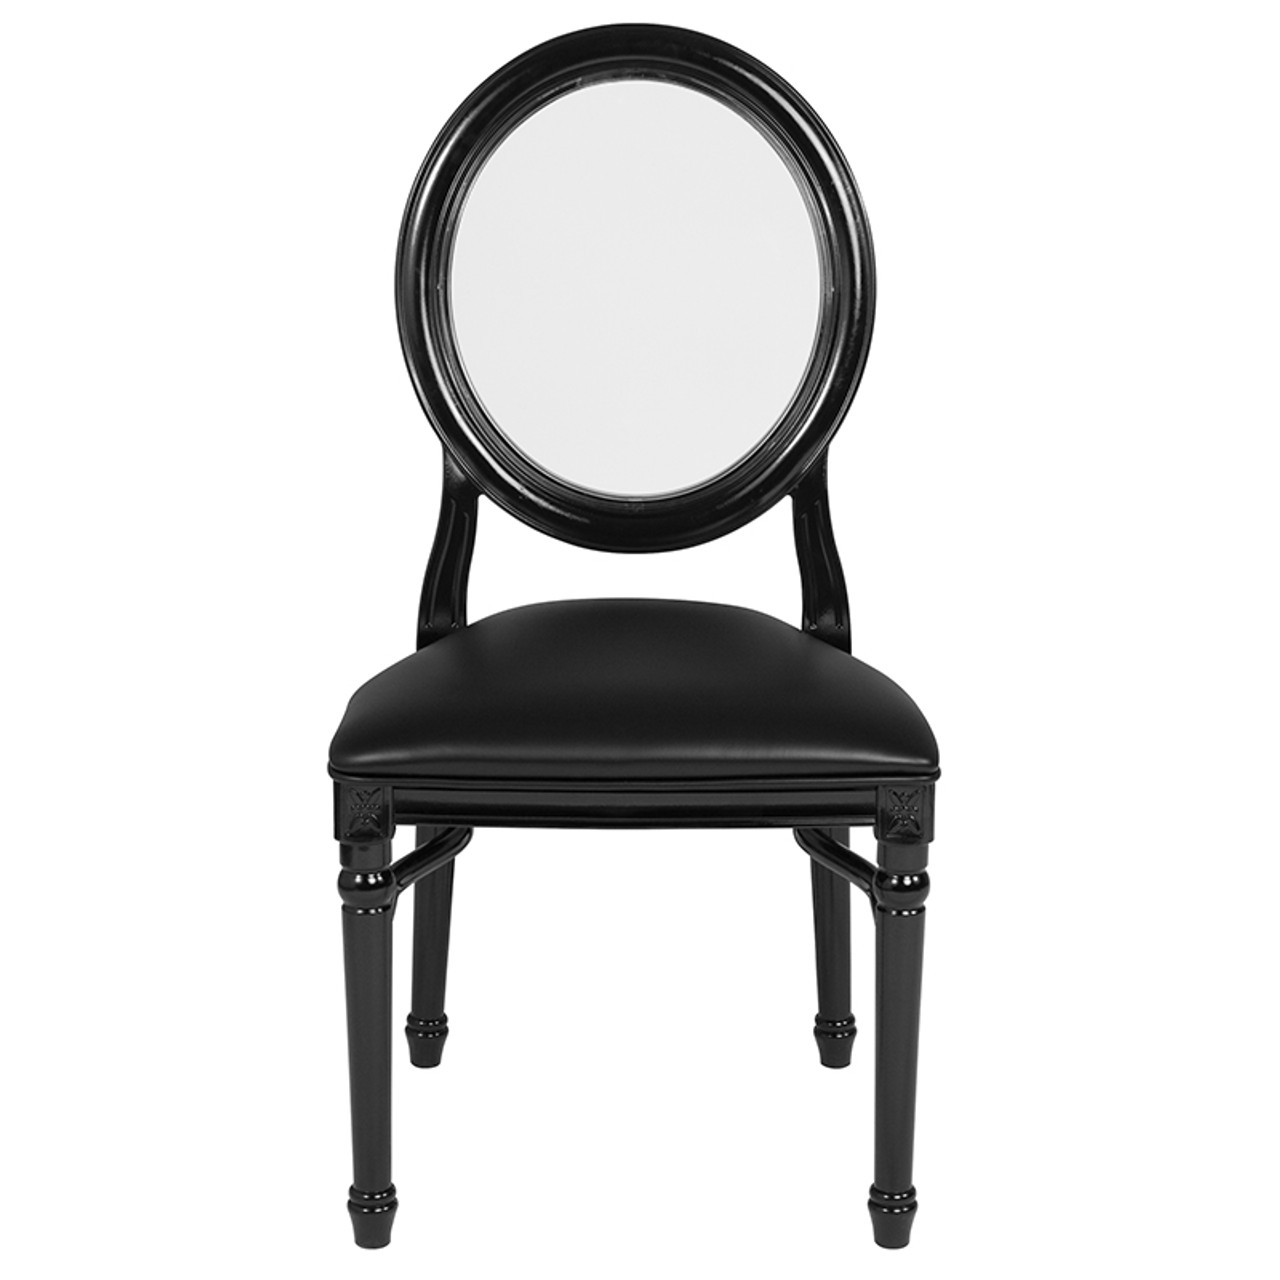 TYCOON Series 900 lb. Capacity King Louis Chair with Tufted Back, Black  Vinyl Seat and Black